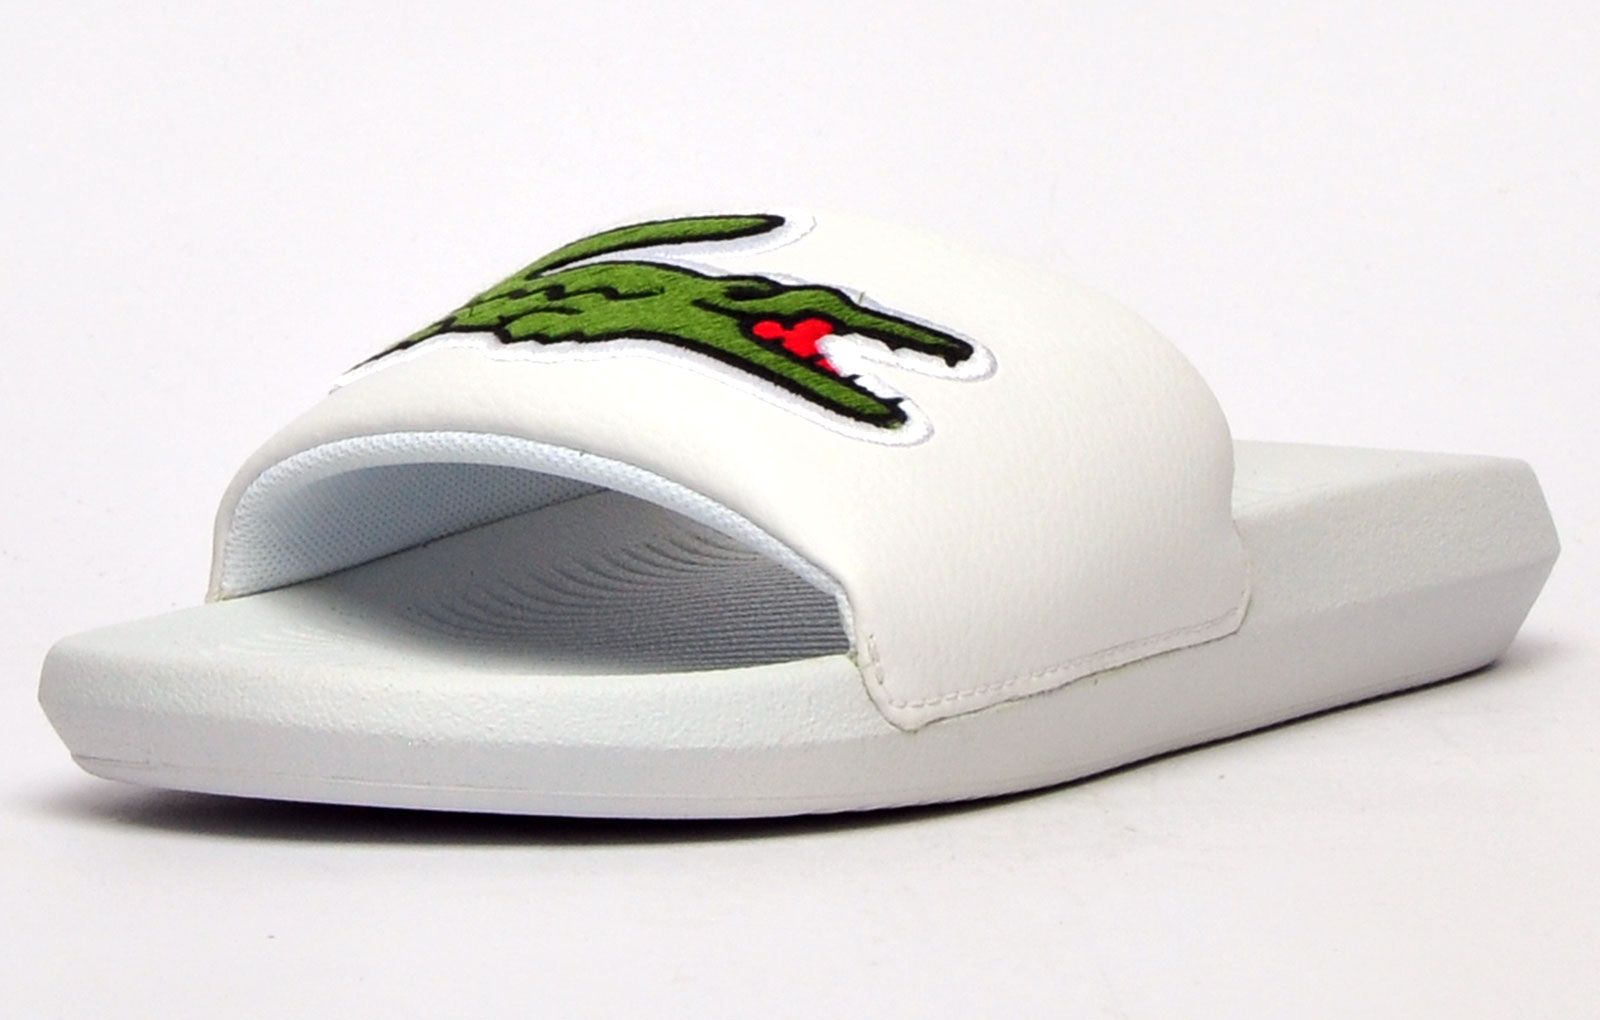 Step into eye catching summer style with these mens Croco Slides from Lacoste. In a bang on trend colourway, these designer sandals are delivered in a smooth synthetic upper with croc detailing across the forefoot foot strap. The comfy footbed moulds to your feet, delivering the perfect fit and feel while the grippy outsole will keep you sure and safe around the pool or in the shower. These designer slides are finished with eye catching Lacoste branding throughout just in case you want a sign of approval that youre wearing cool classic style this summer season 
 - Comfort moulded footbed
 - Single strap detail over foot
 - Grippy outsole
 - Slip on wear
 - Iconic Lacoste branding throughout
 Please Note: These Lacoste Sliders are sold as B grades which means they have some slight cosmetic issues on the shoe and they come poly bagged. All shoes are guaranteed against fair wear and tear and offer a substantial saving against the normal high street price. The overall function or performance of the shoe will not be affected by cosmetic issues. B Grades are original authentic products released by the brand manufacturer with their approval at greatly reduced prices. If you are unhappy with your purchase we will be more than happy to take the shoes back from you and issue a full refund.